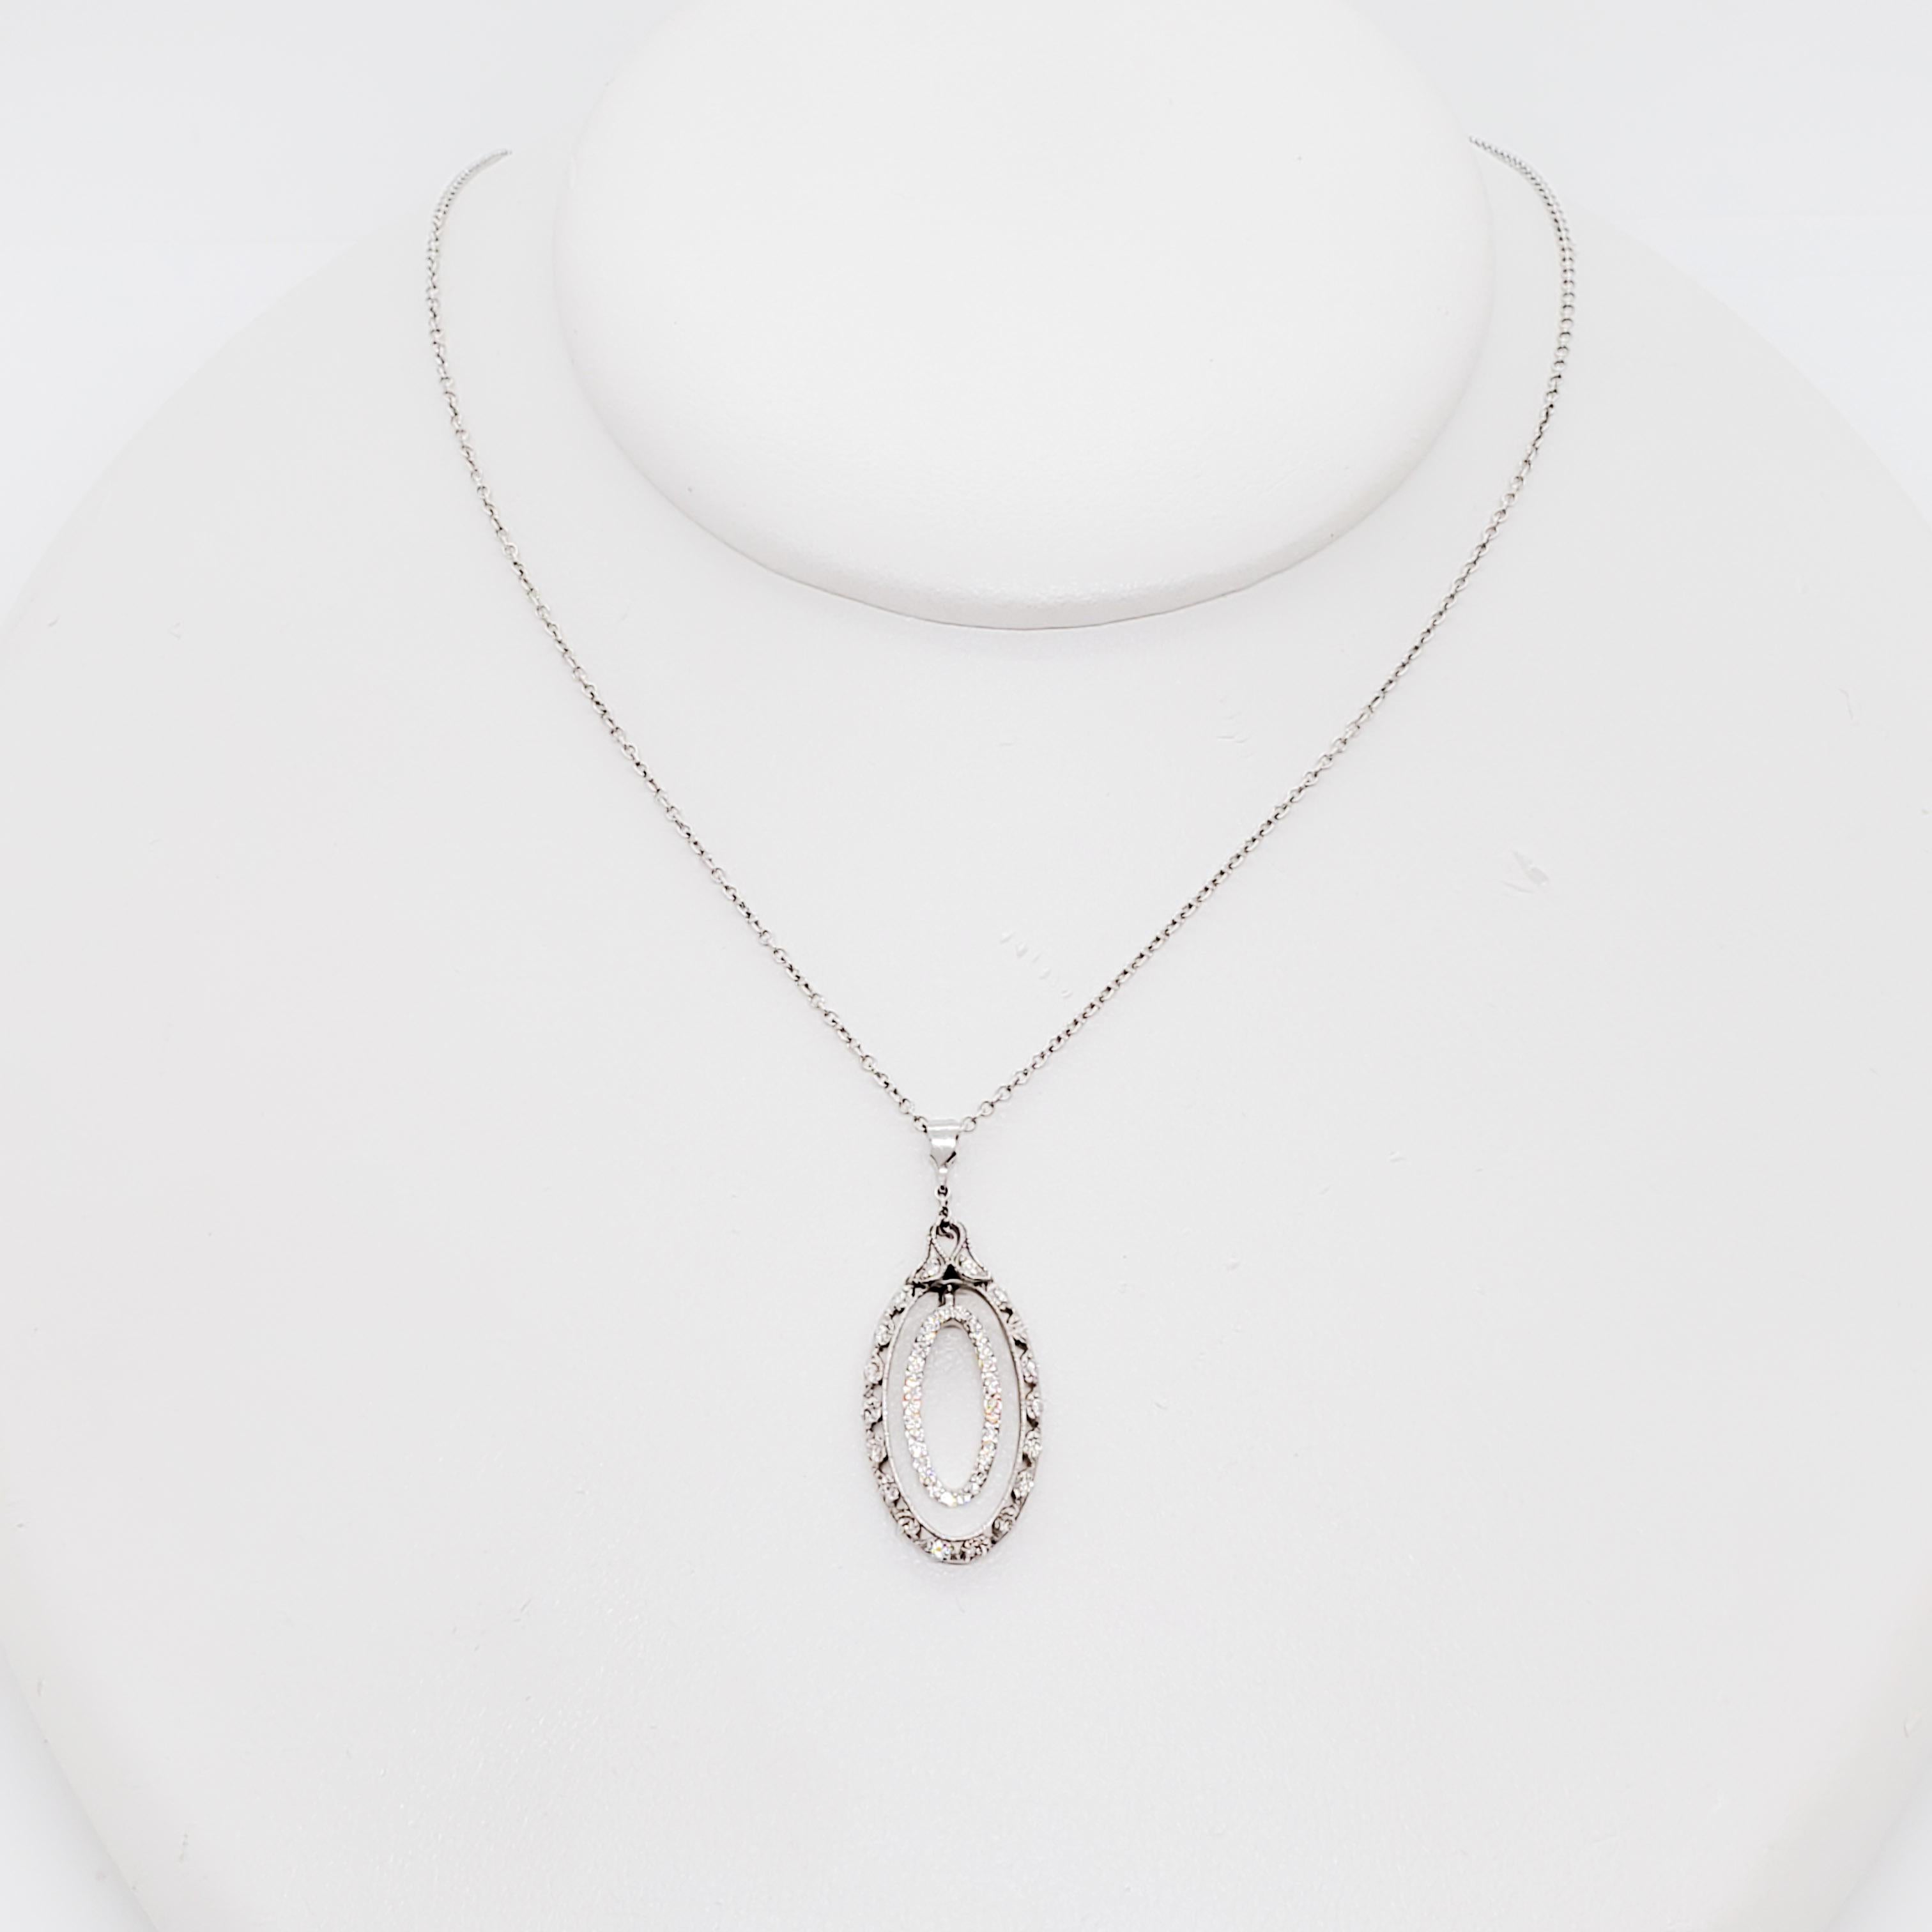 Beautiful estate Tacori oval pendant necklace featuring 0.25 ct. of good quality white diamond rounds in a handmade 18k white gold mounting and chain.  Length of necklace is 18